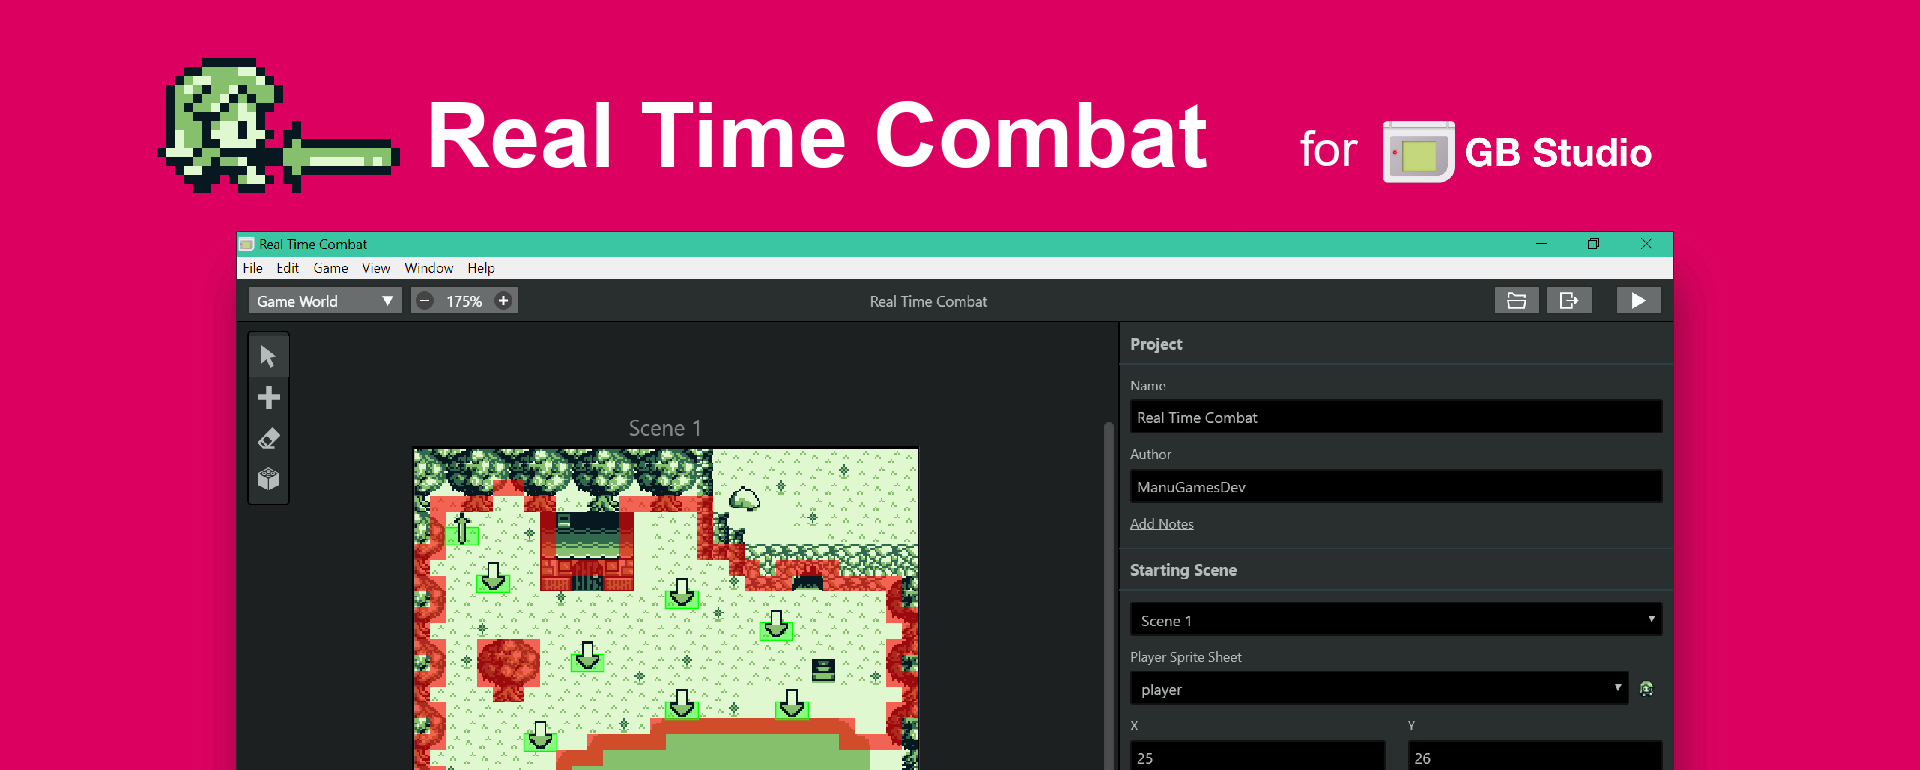 Real Time Combat for GB Studio 2.0